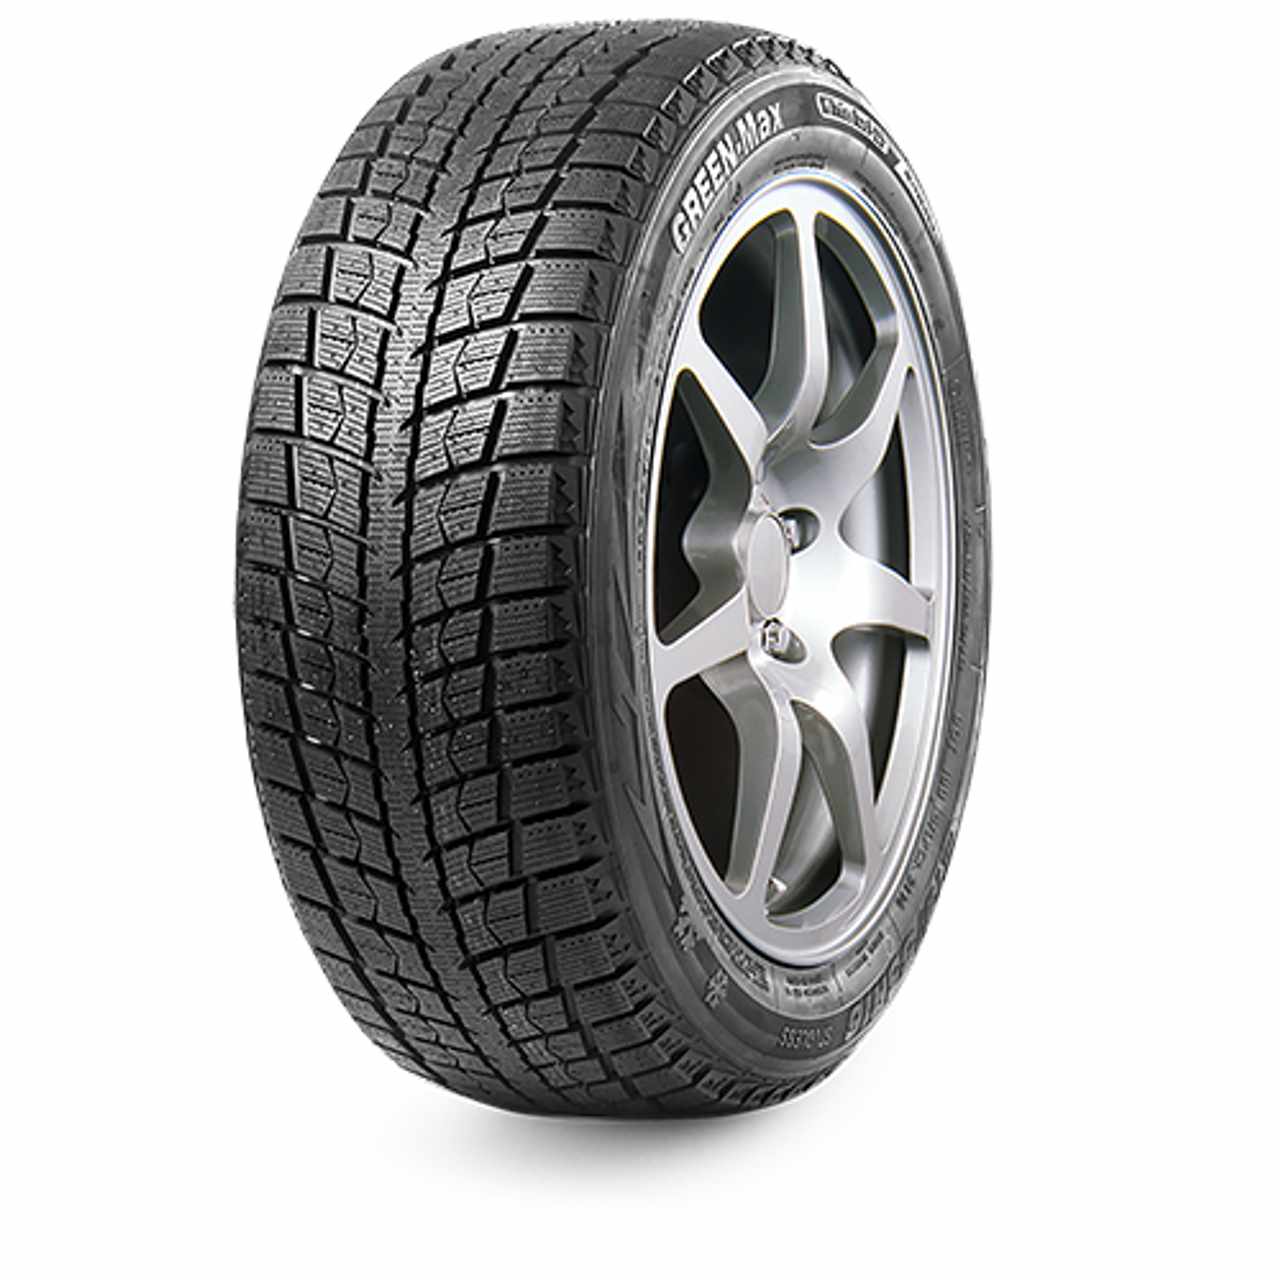 LINGLONG GREEN-MAX WINTER ICE I-15 SUV 295/40R21 107T NORDIC COMPOUND MFS BSW von LINGLONG